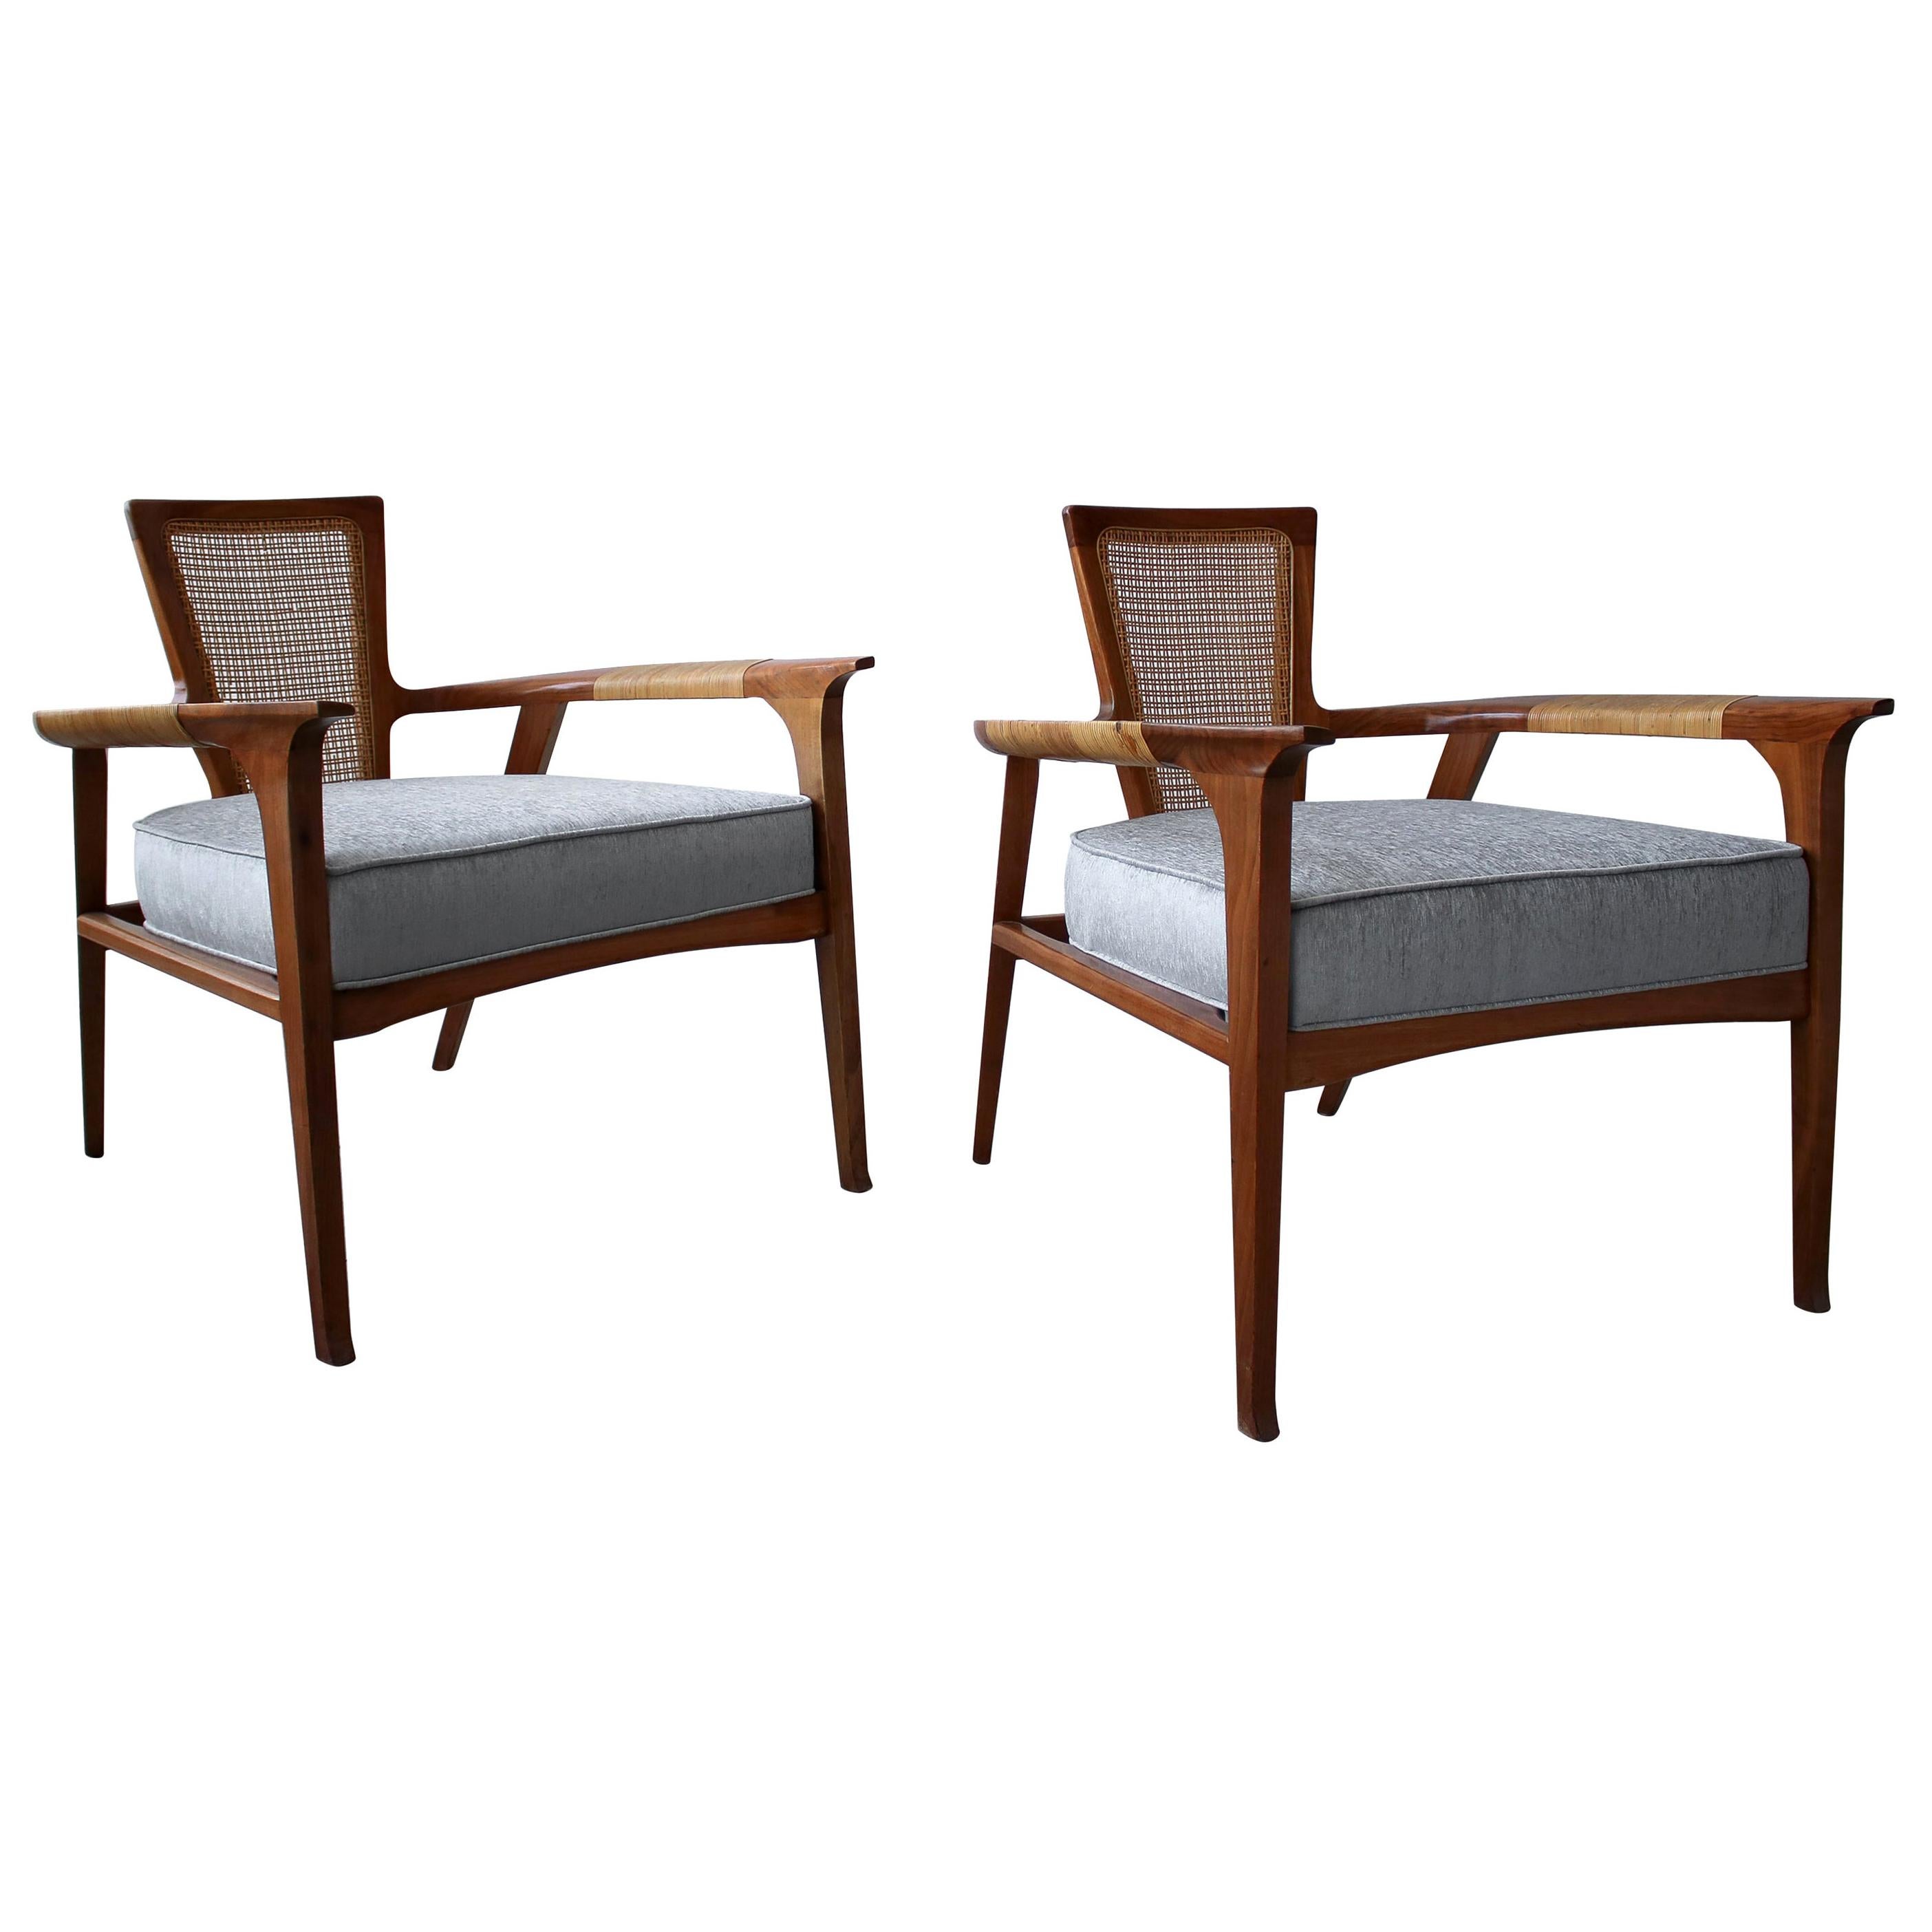 Pair of Midcentury Walnut and Cane Lounge Chairs by William Hinn